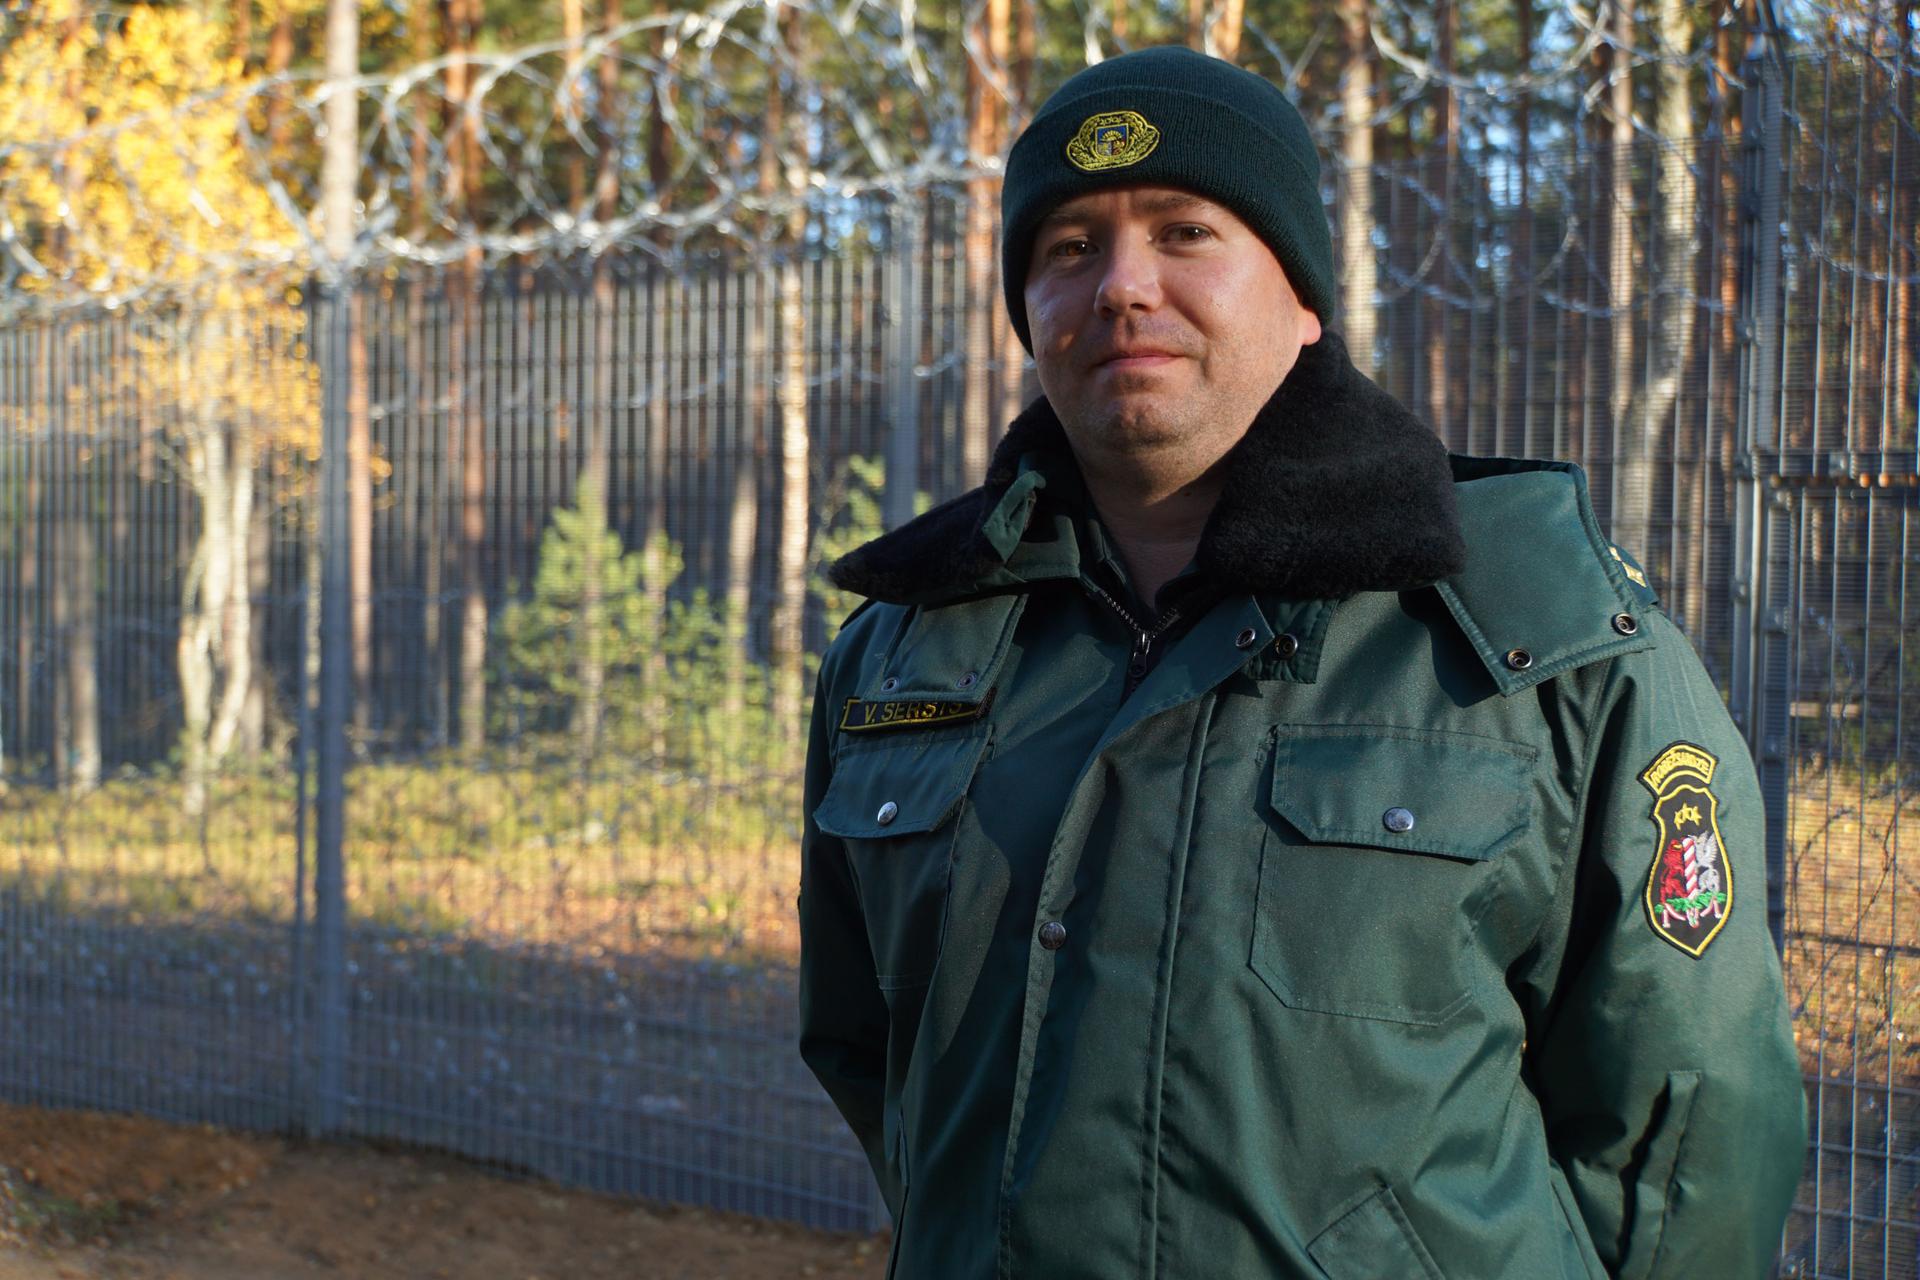 Vladimirs Šersts is a border officer on the Latvian side of the border.